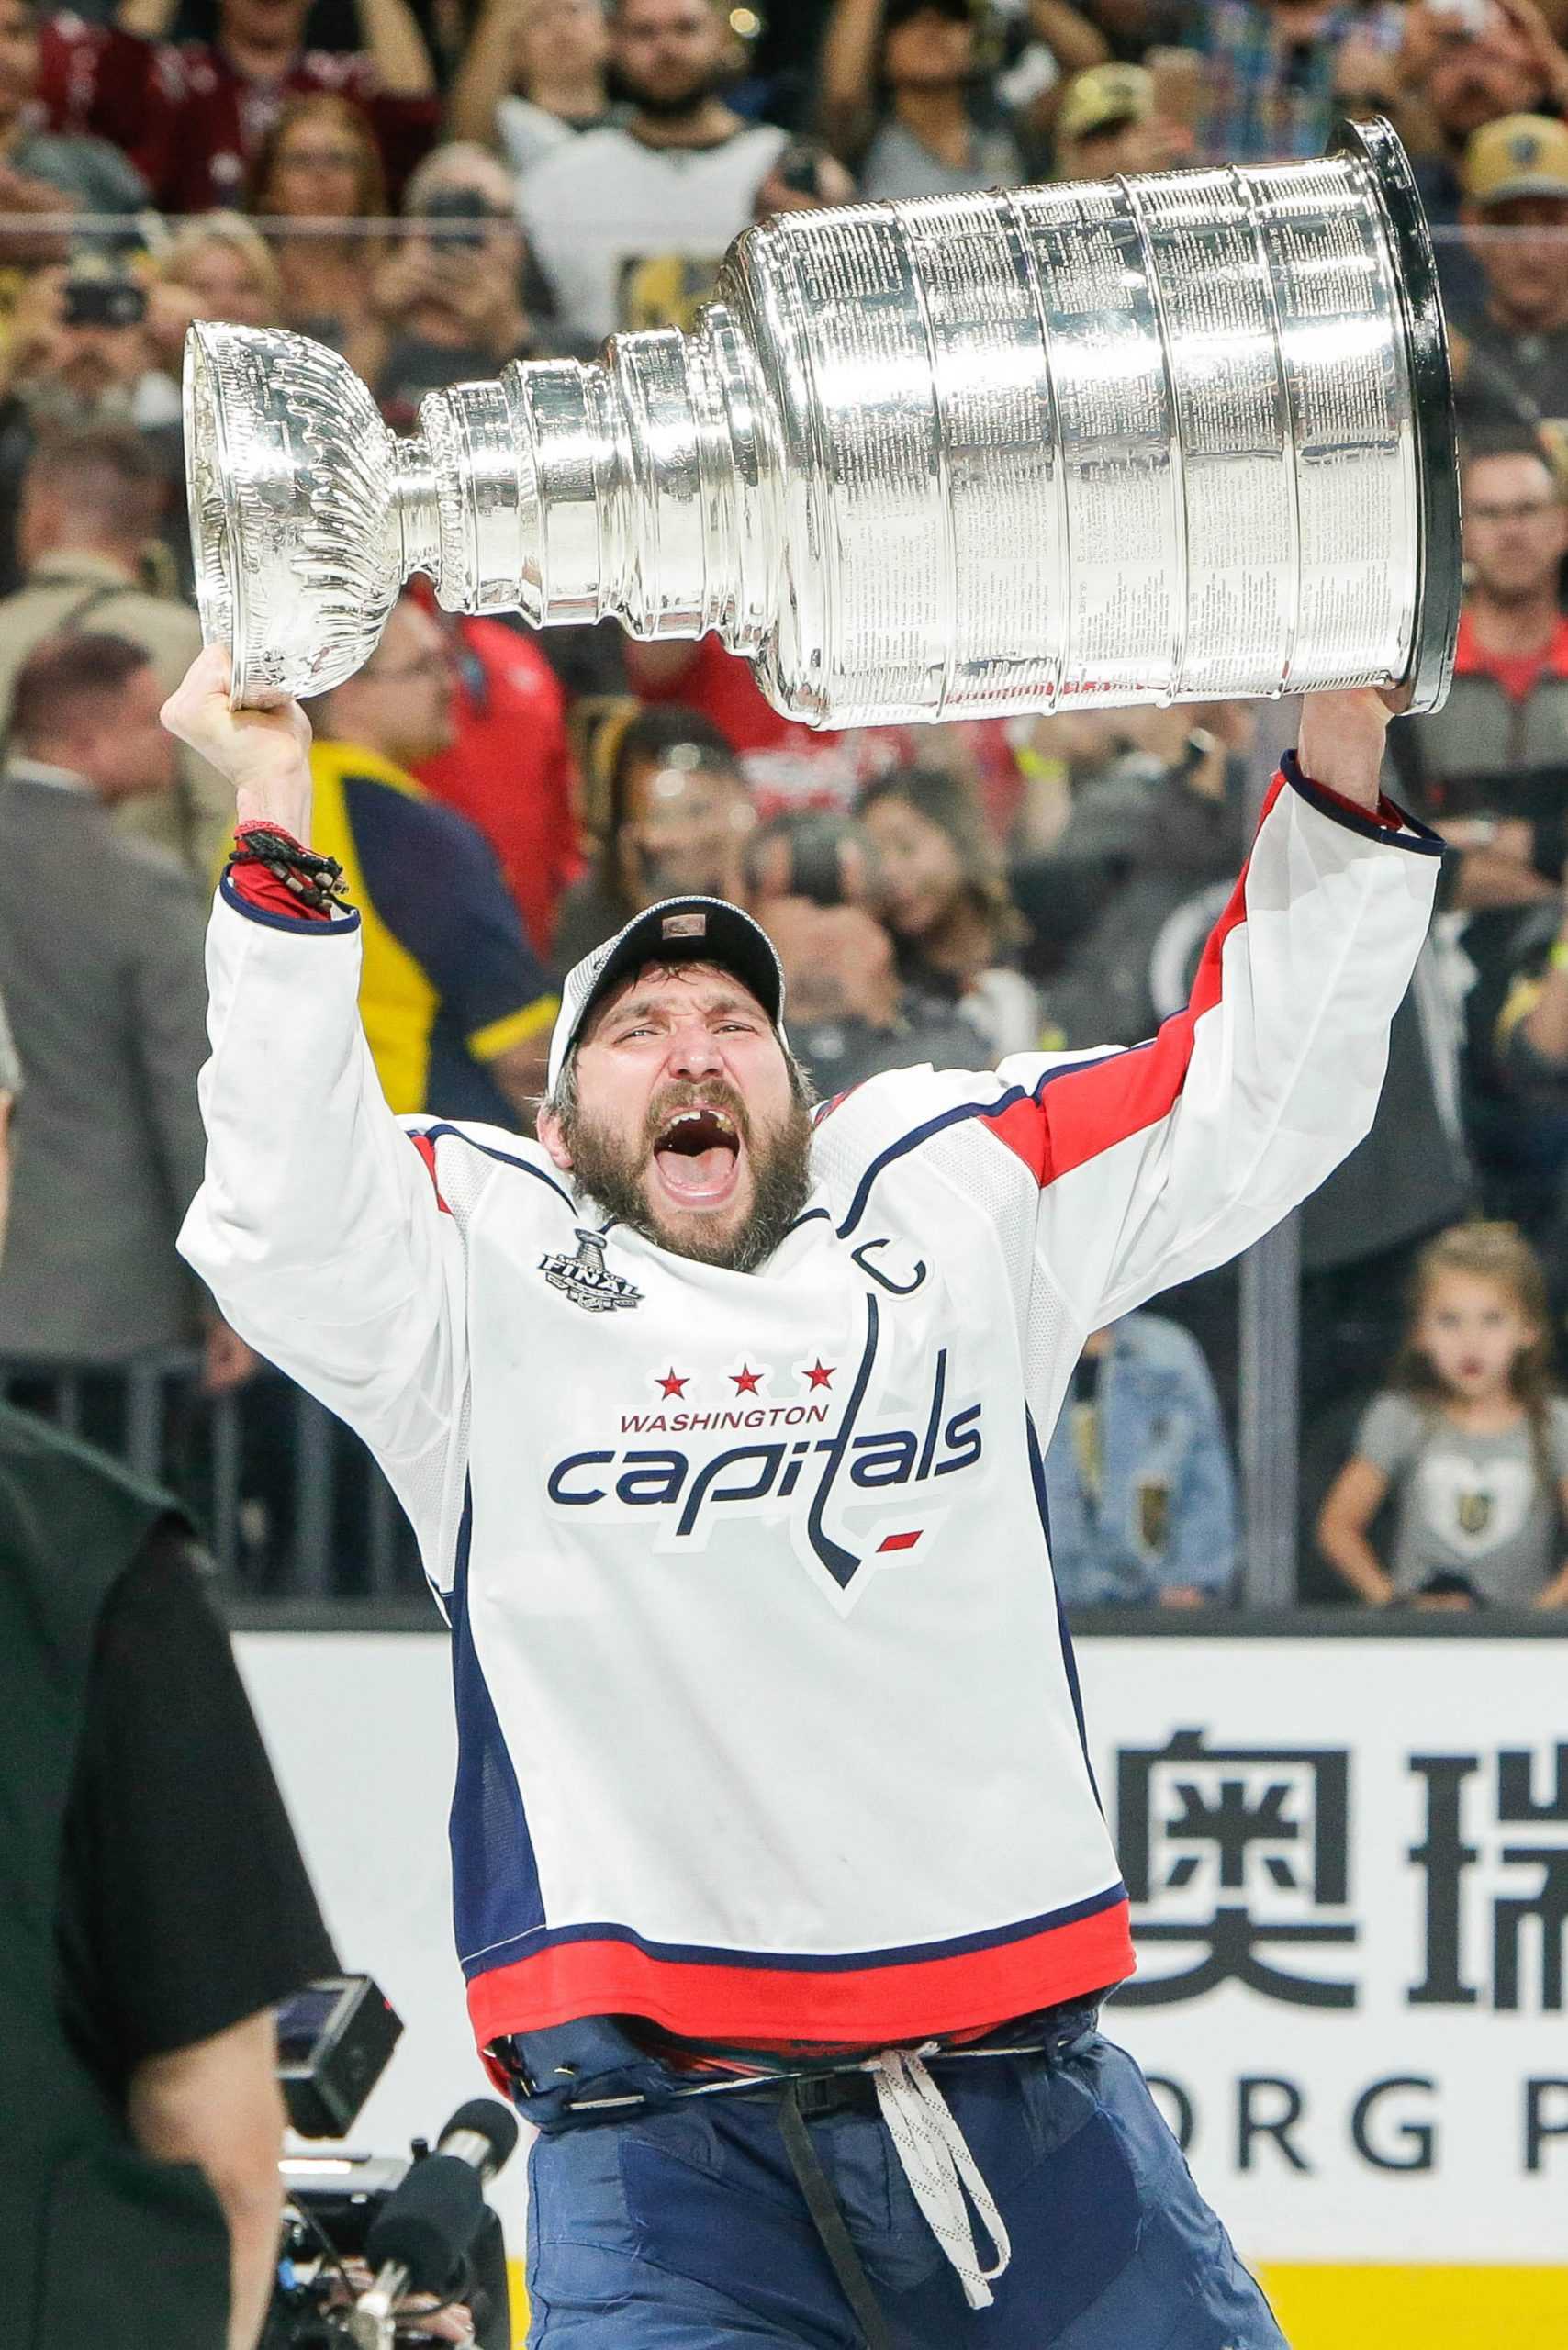 Washington Capitals left wing Alex Ovechkin skates with the Stanley Cup after defeating the Vegas Golden Knights in Game 5 at T-Mobile Arena in Las Vegas on June 7, 2018. (John Crouch/Cal Sport Media/Zuma Press/TNS)